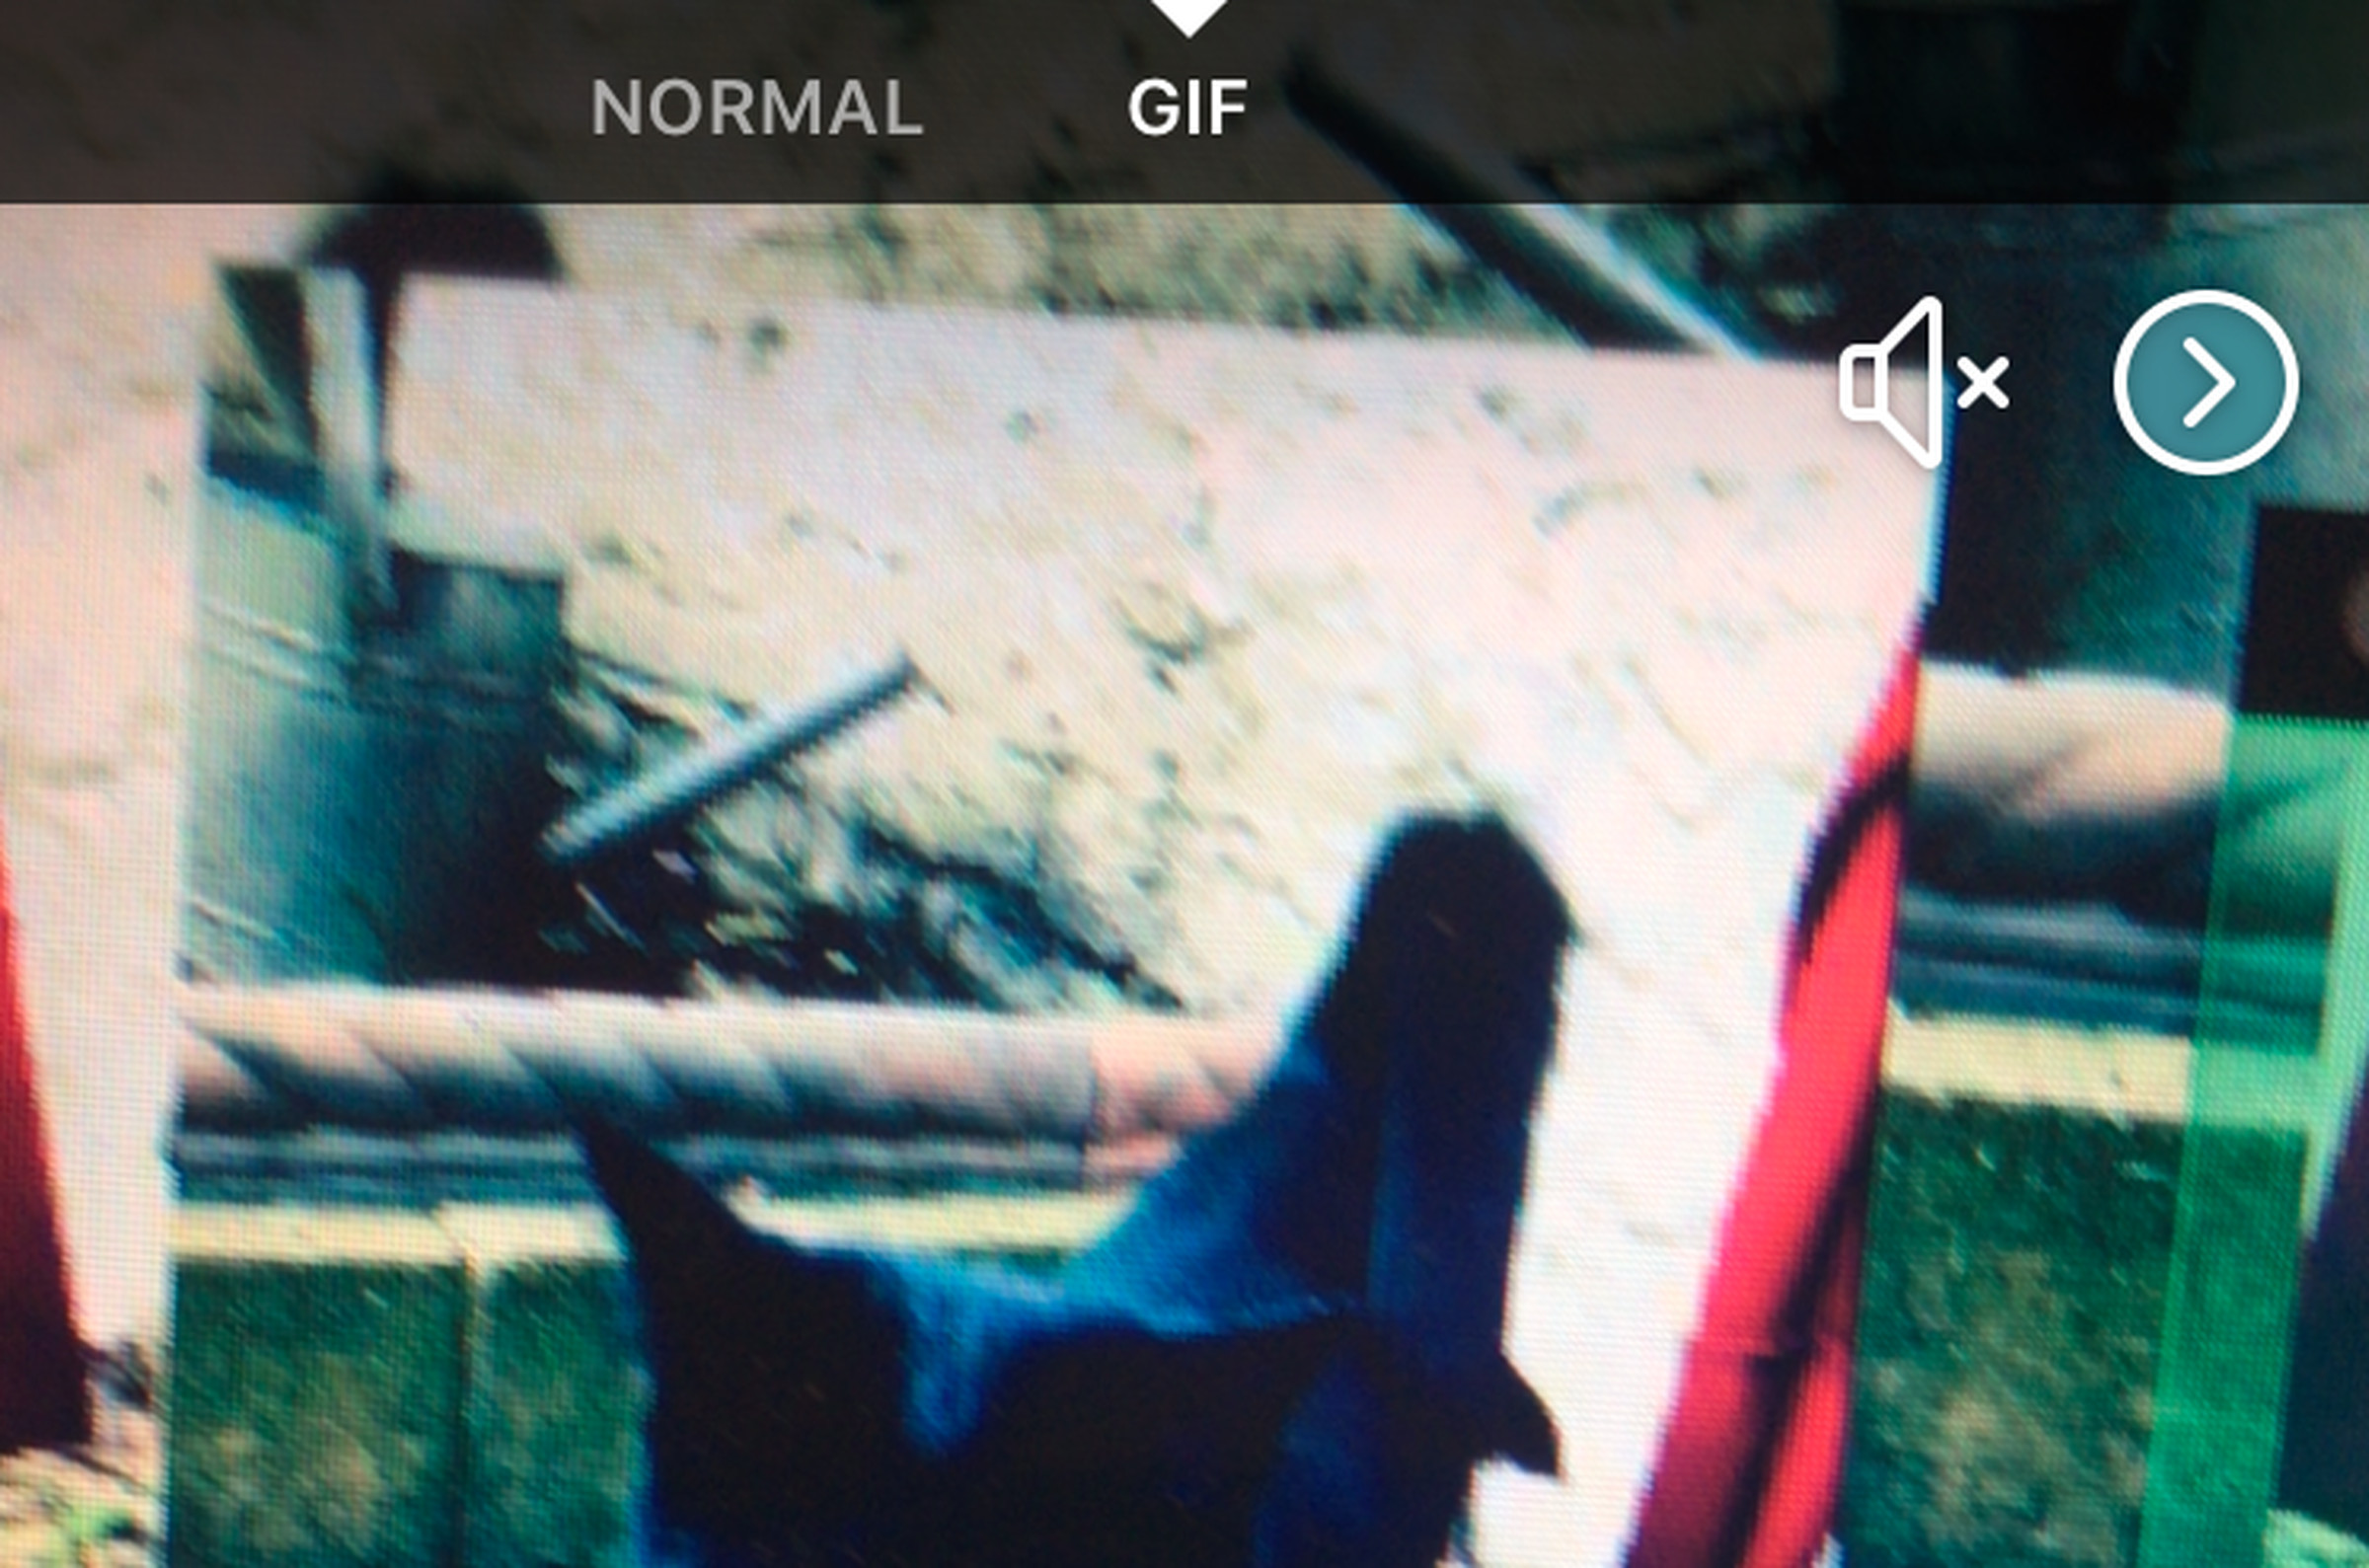 A screenshot of Facebook’s camera showing the GIF option at the top.